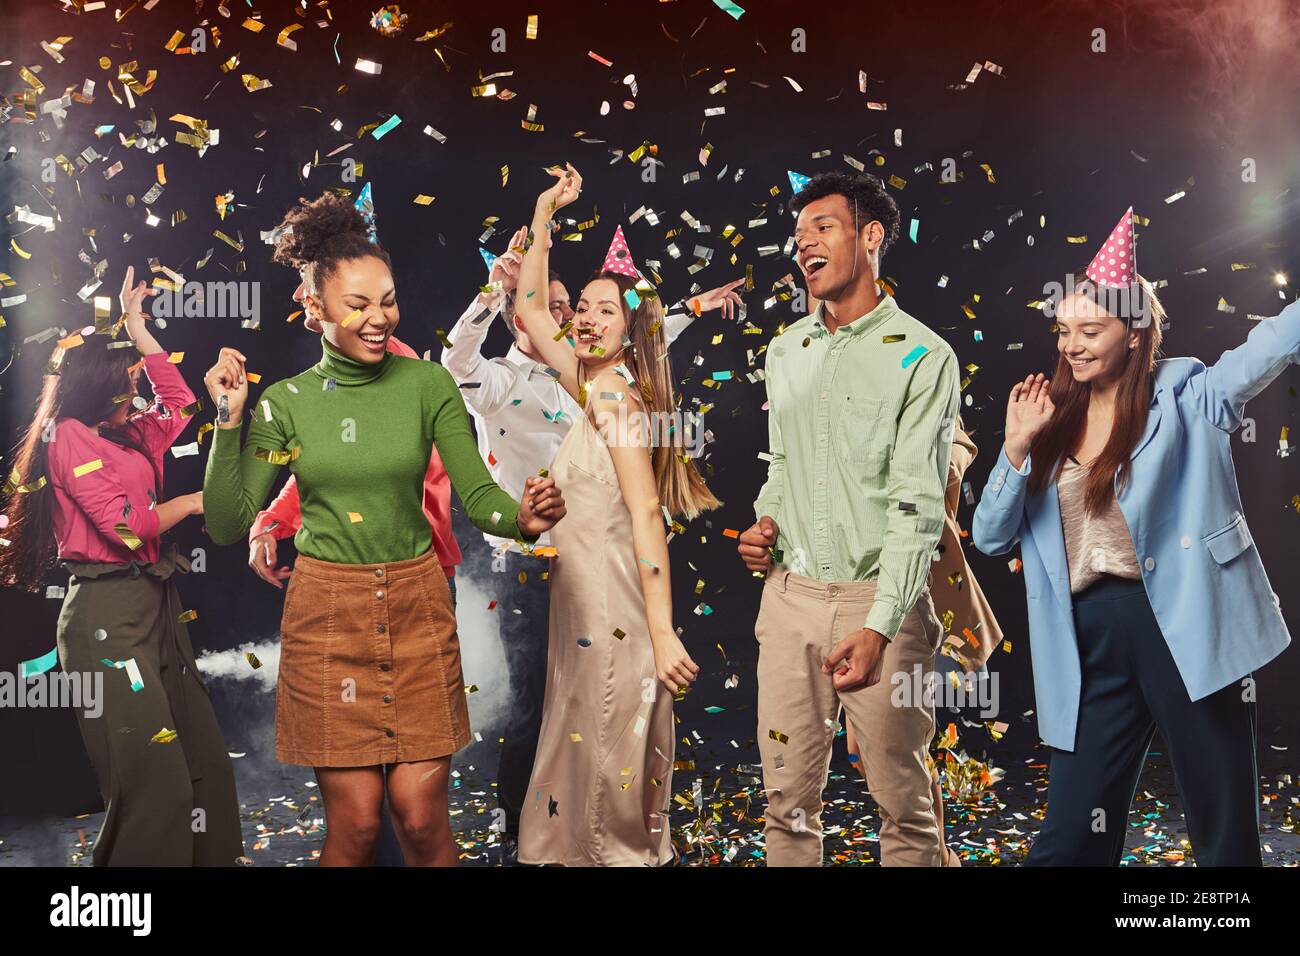 Celebration and party. Group of young happy multiracial people wearing birthday hats dancing and having fun, confetti falling in the air Stock Photo